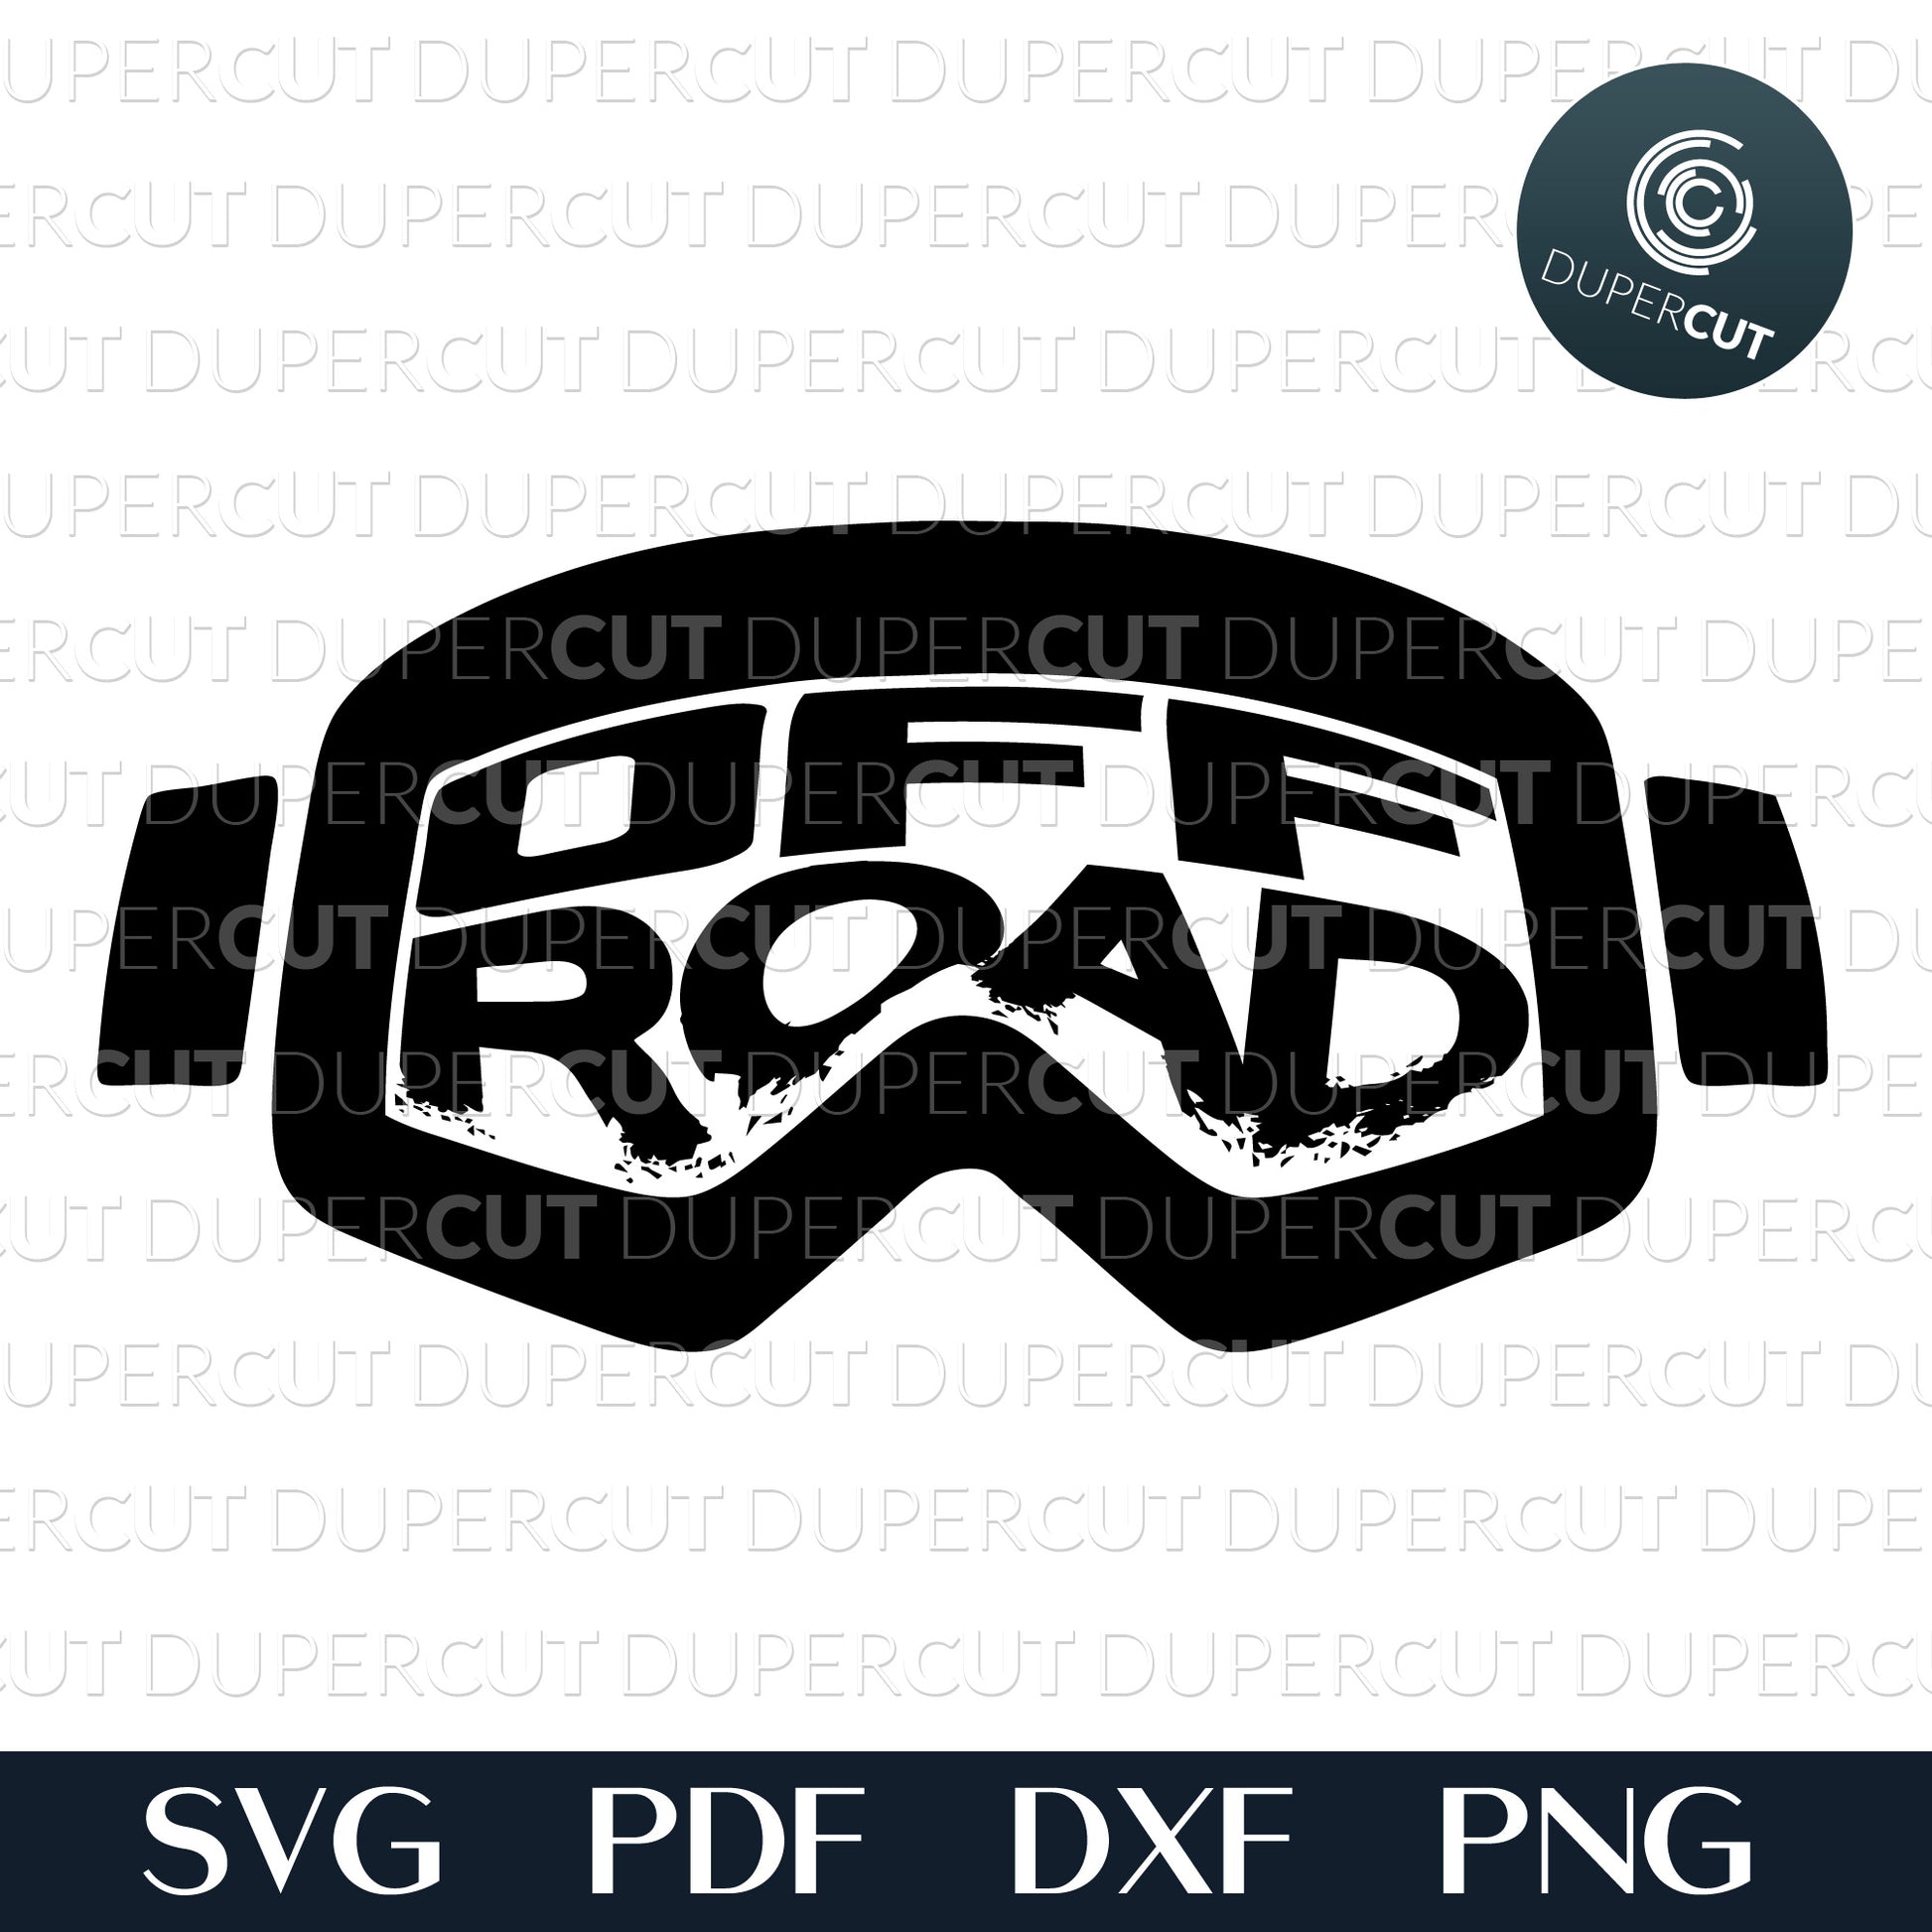 Off-roading, overlanding goggles clipart. SVG JPEG DXF files. Template for paper cutting, laser, print on demand. For use with Cricut, Glowforge, Silhouette Cameo, CNC machines. Personal or commercial license.